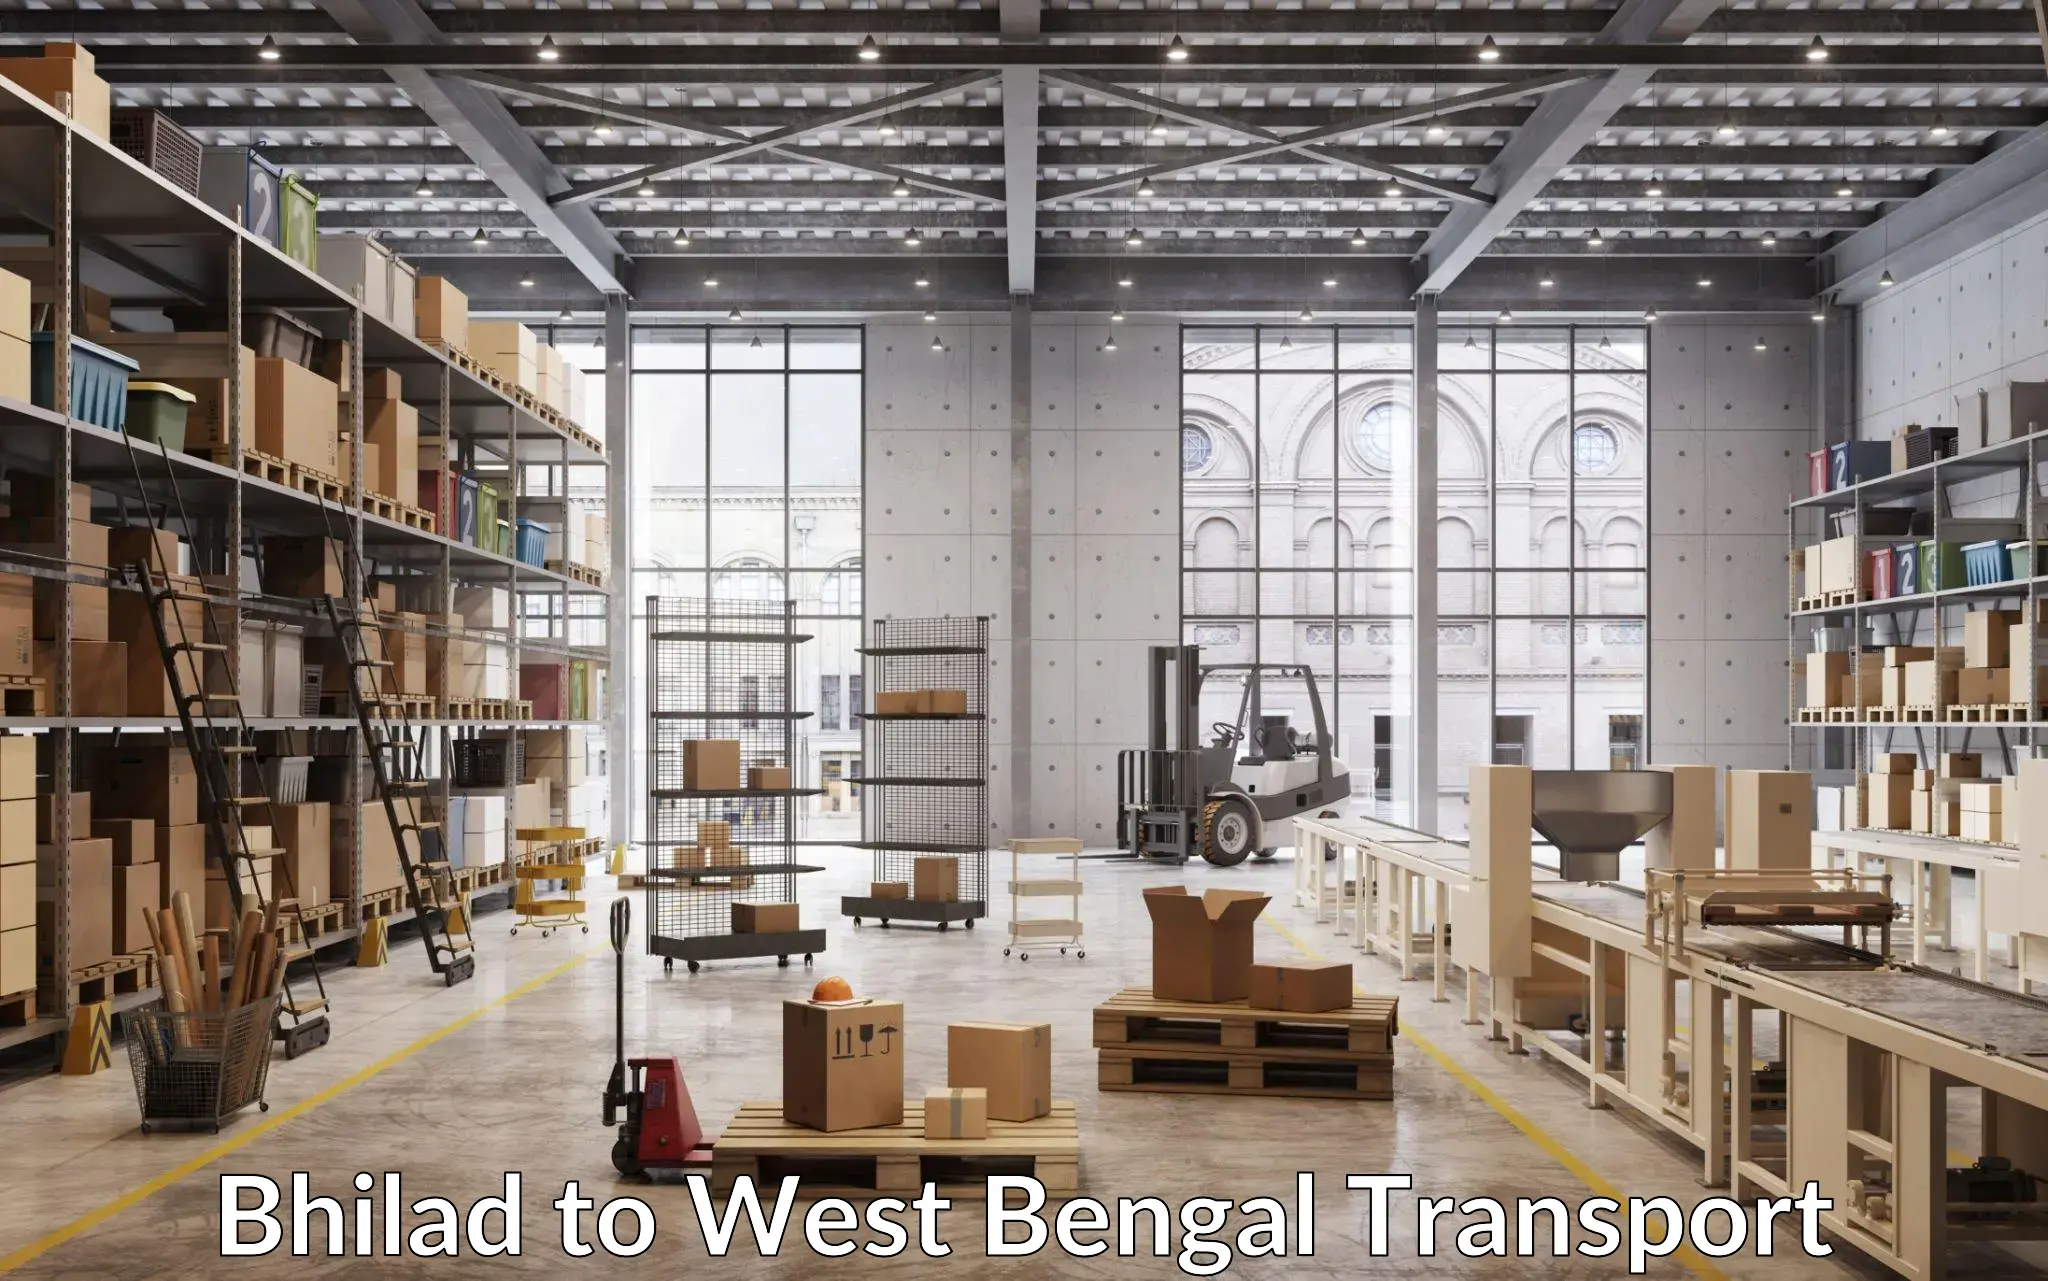 Nearby transport service Bhilad to West Bengal